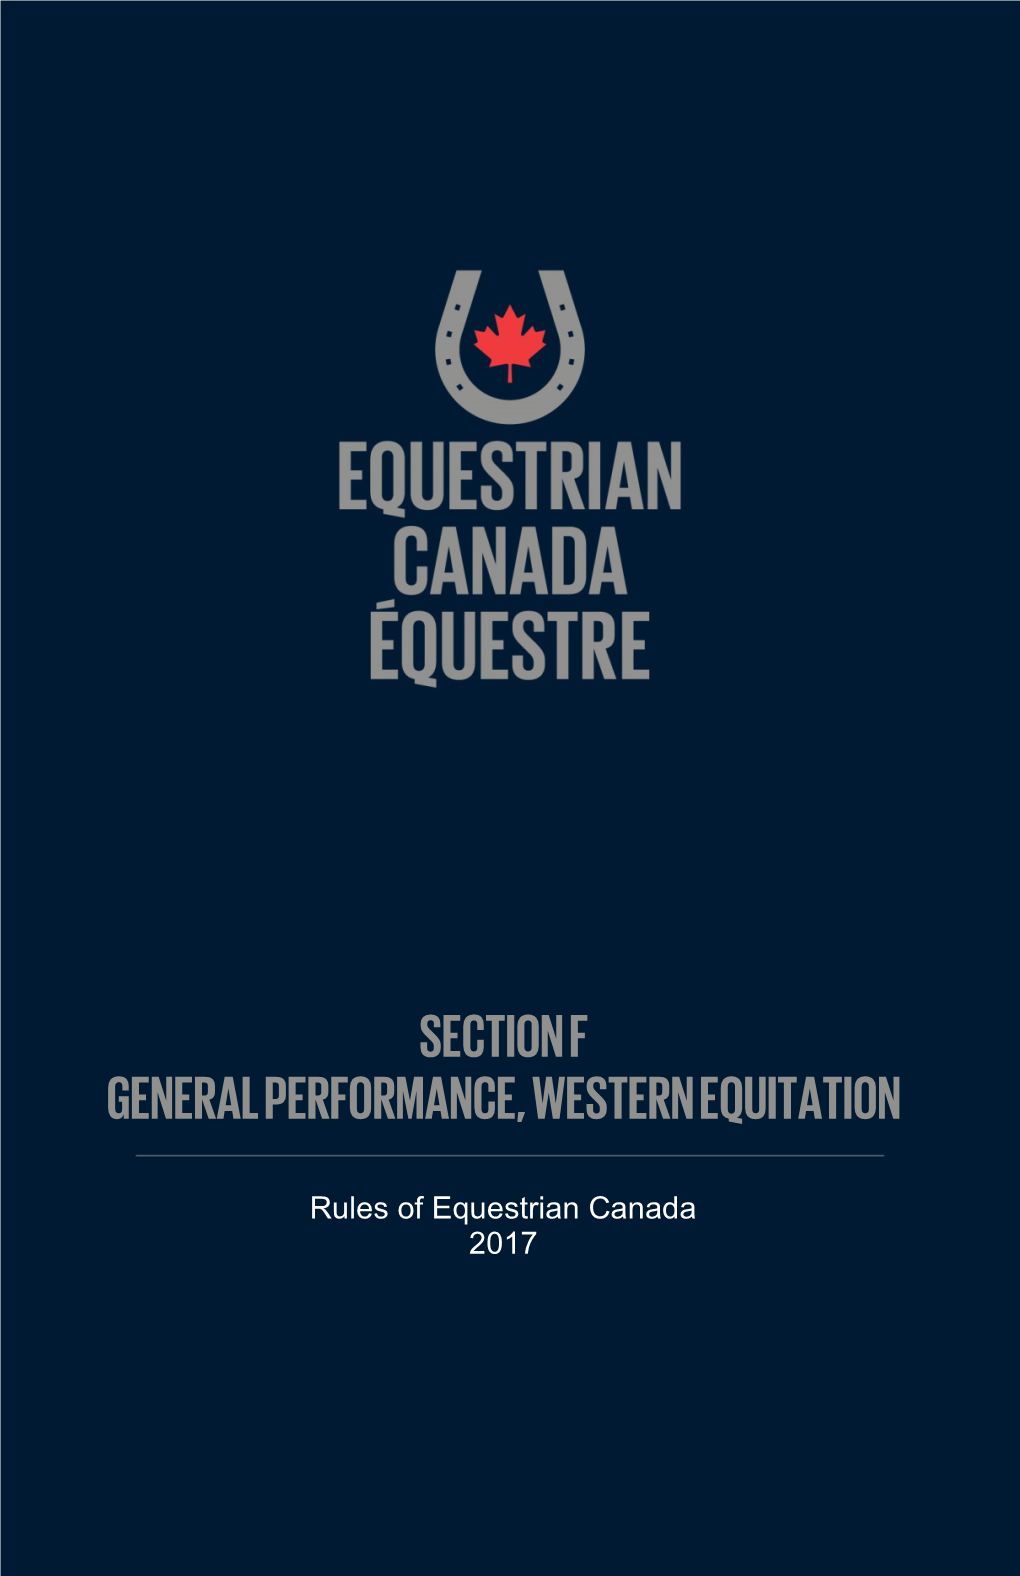 Section F General Performance, Western Equitation